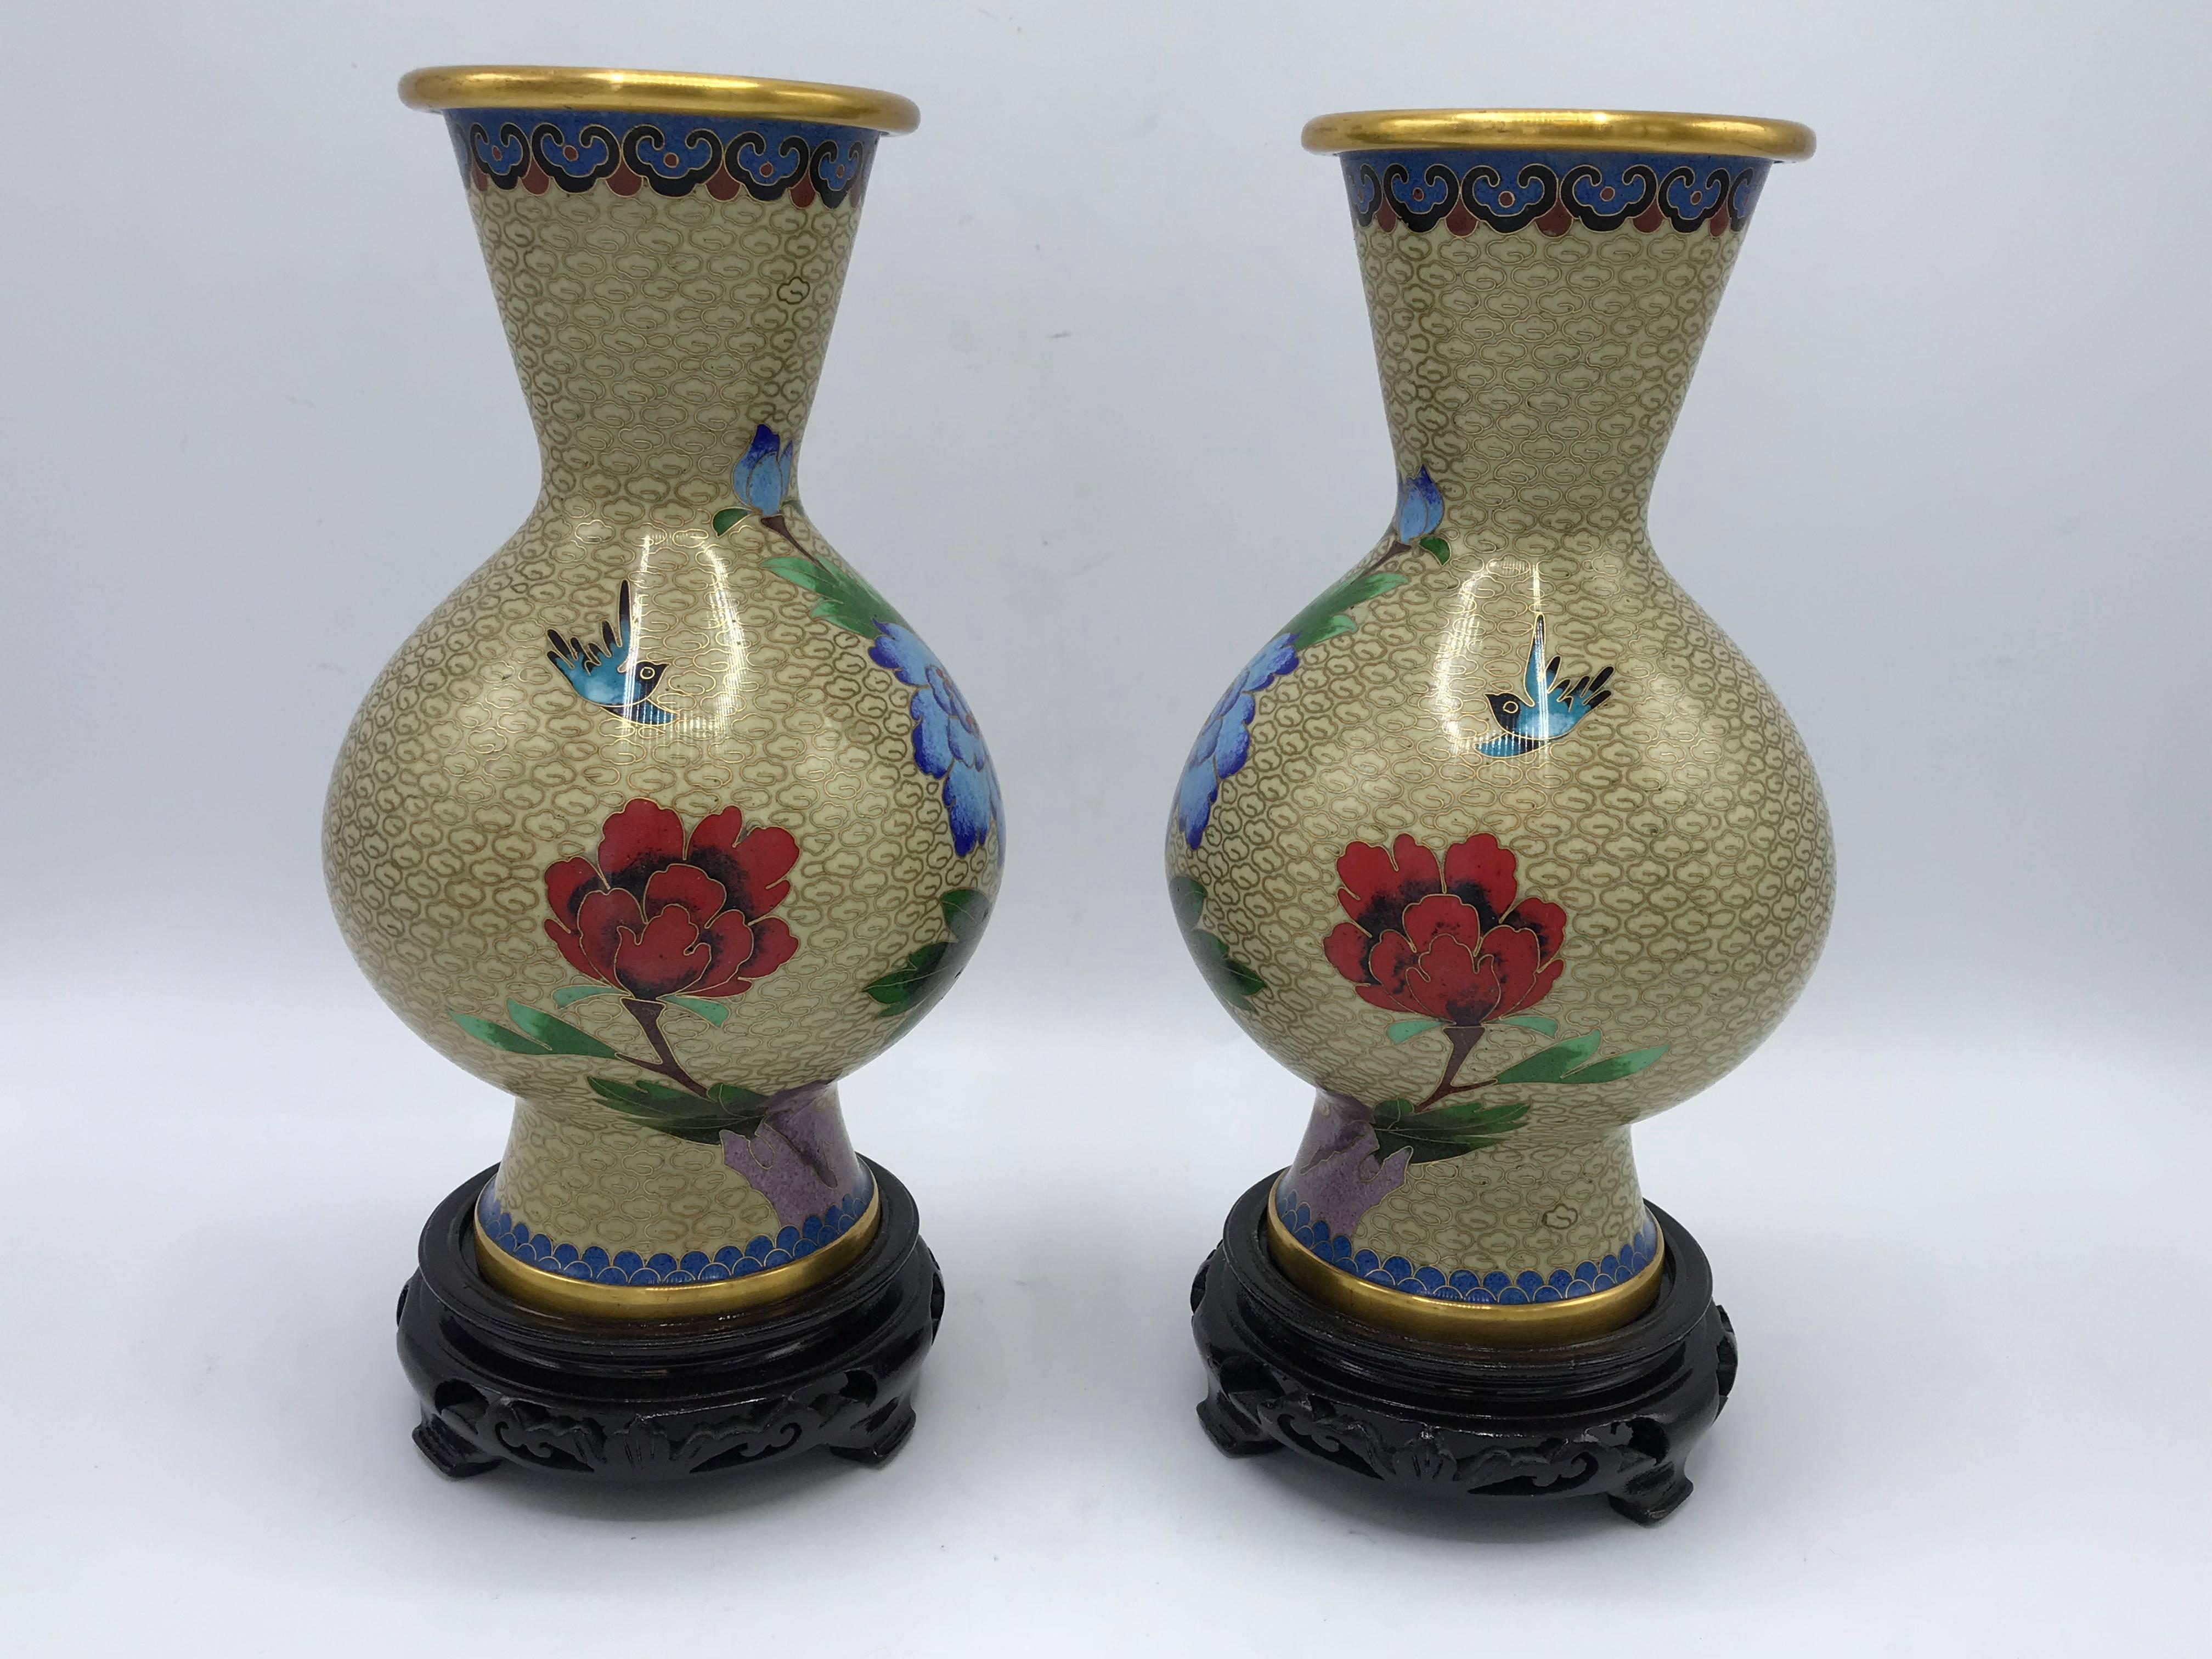 1960s Cloisonné Polychrome Floral Motif Vase on Stand, Pair In Good Condition For Sale In Richmond, VA